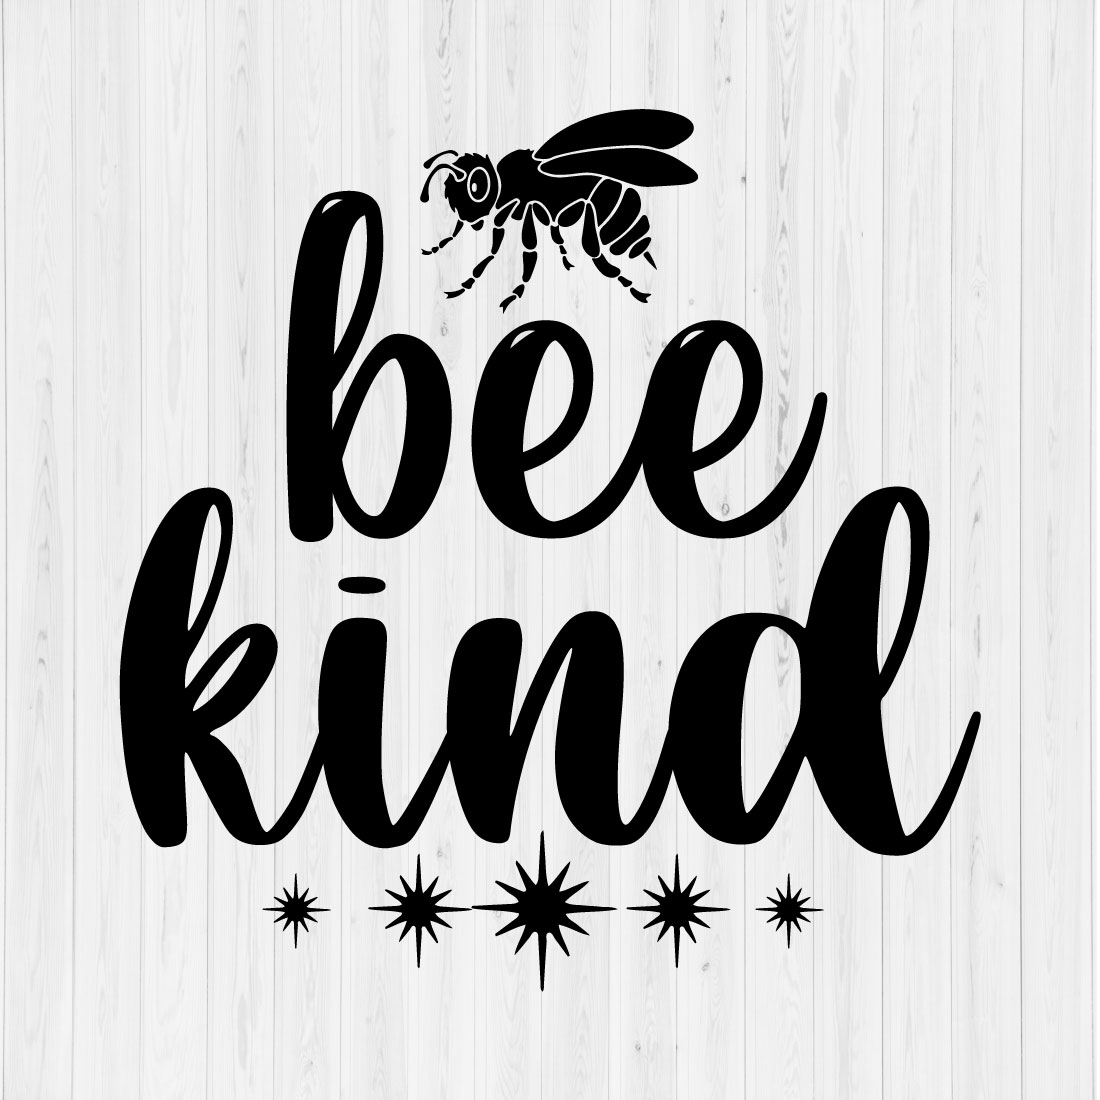 Bee kind cover image.